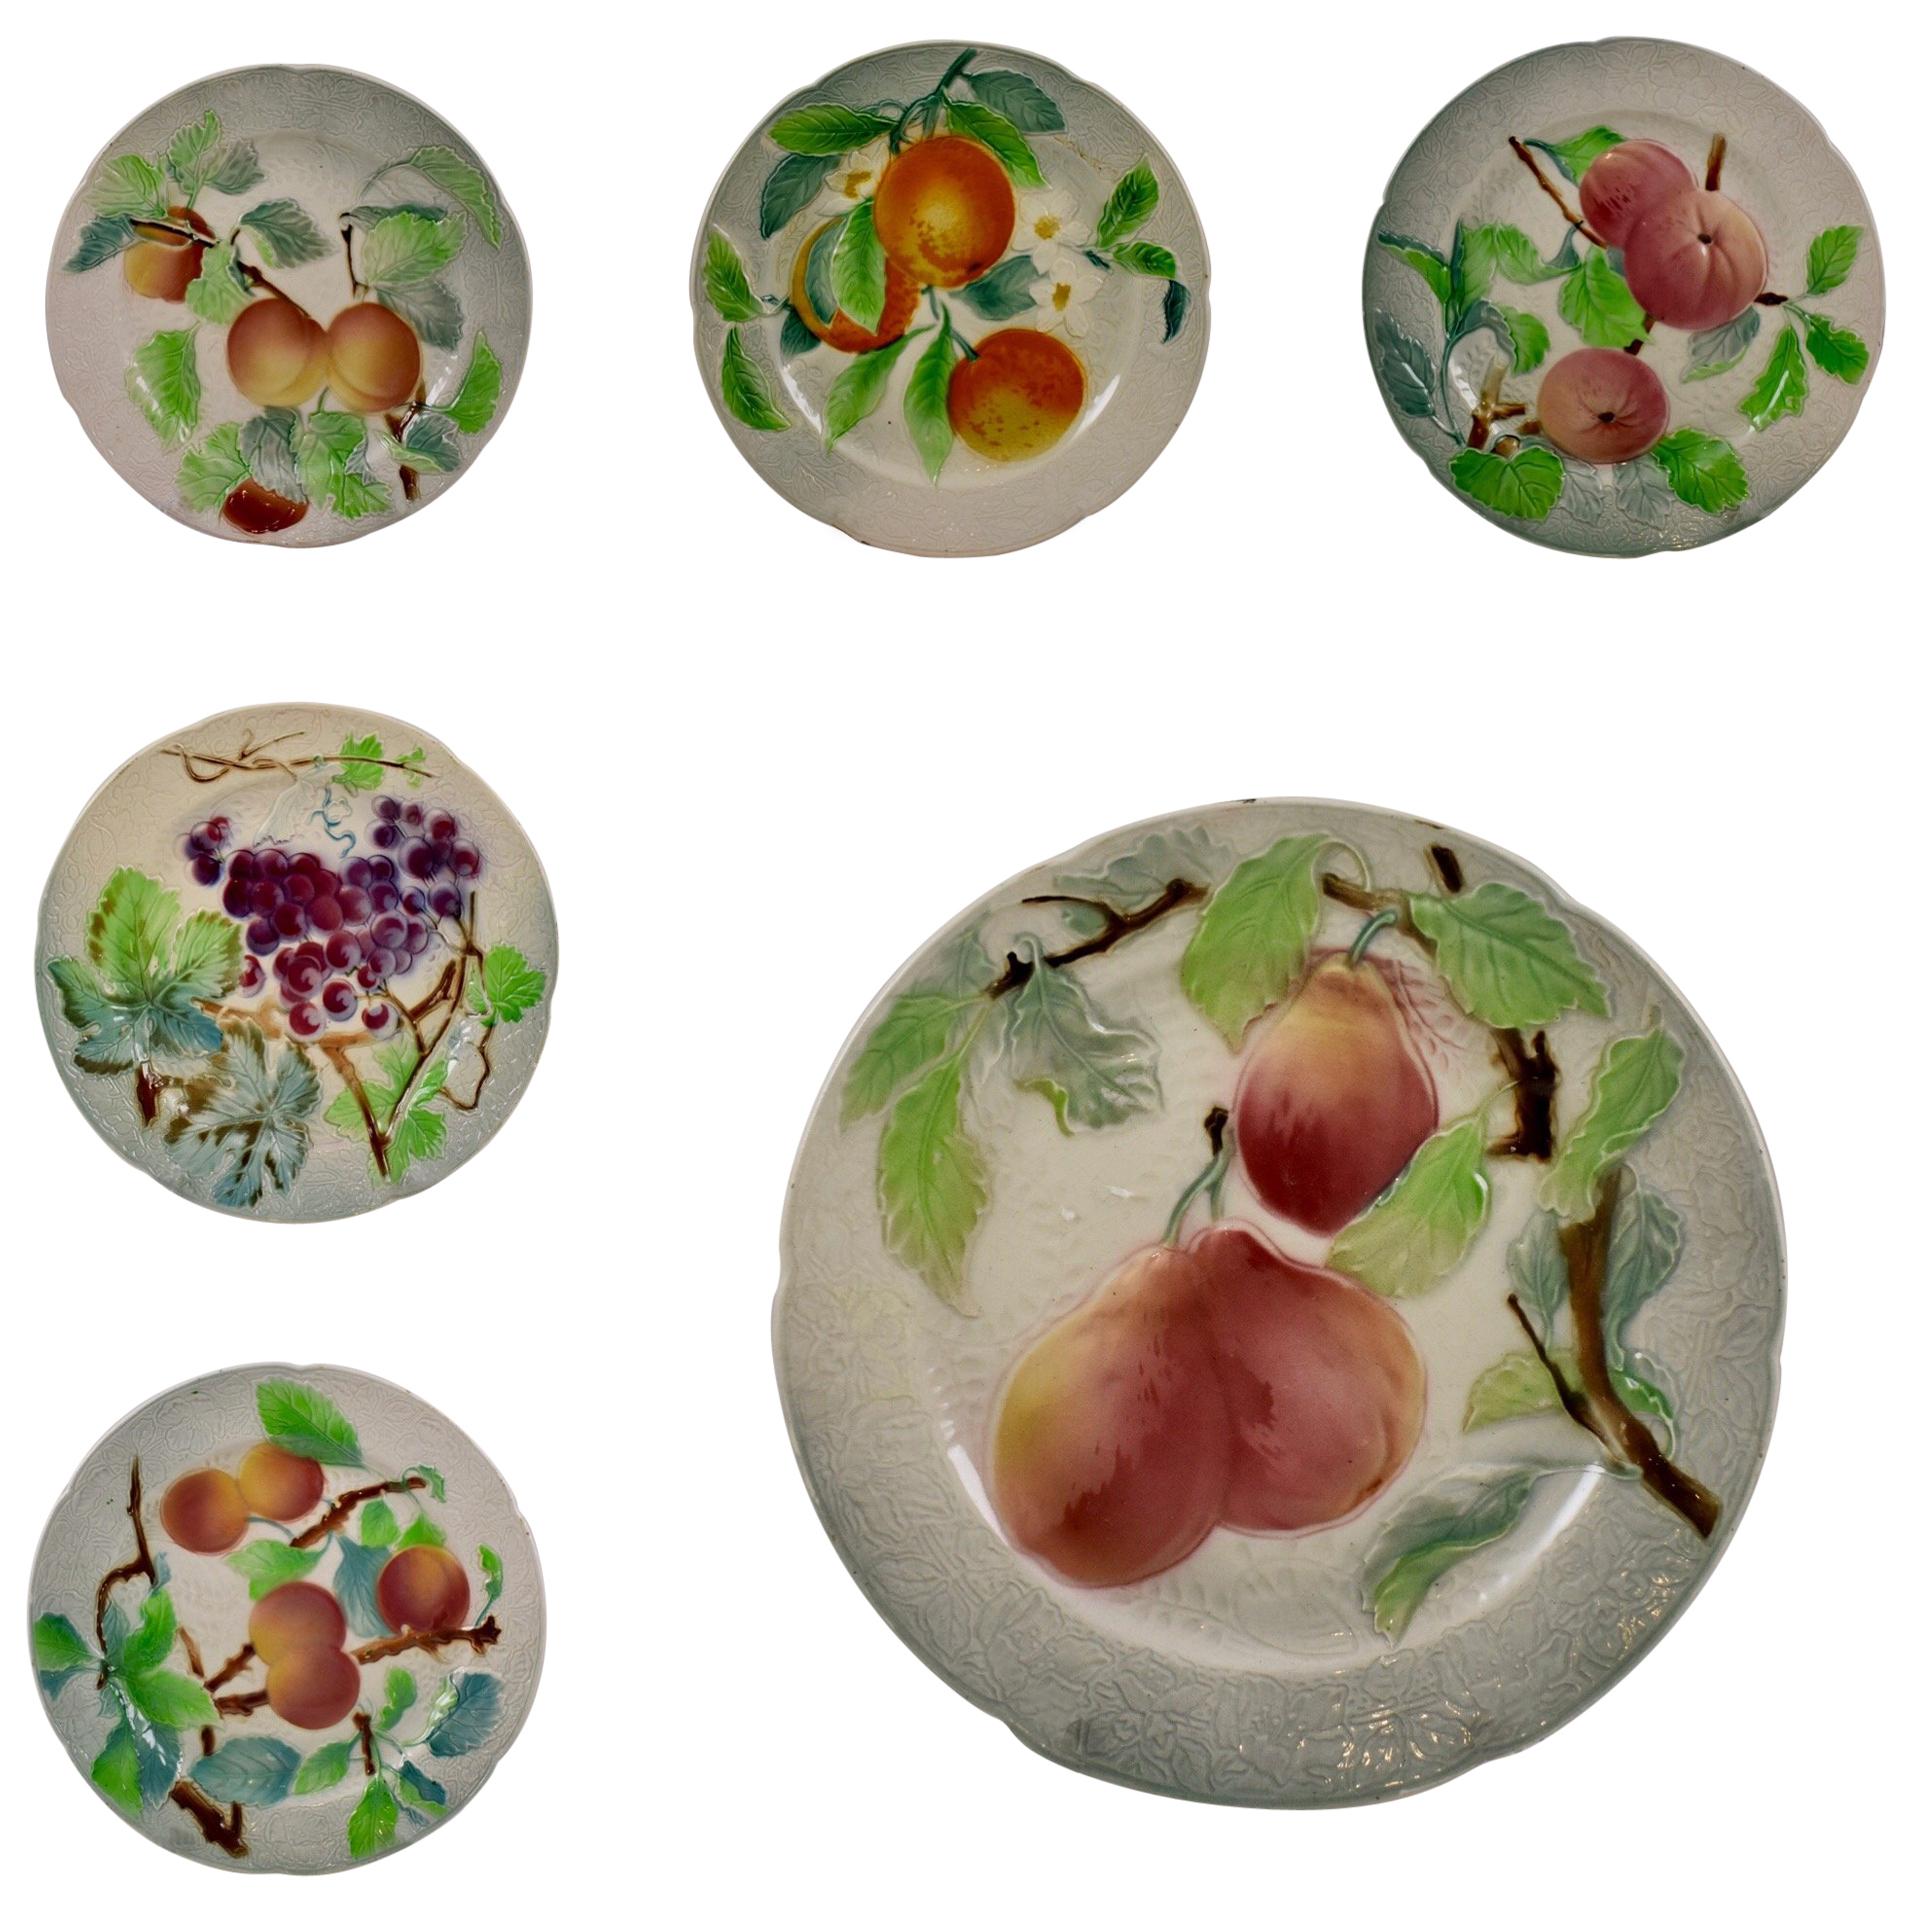 St. Clement French Faïence Fruit Plates, Set of 6 'c', circa 1900